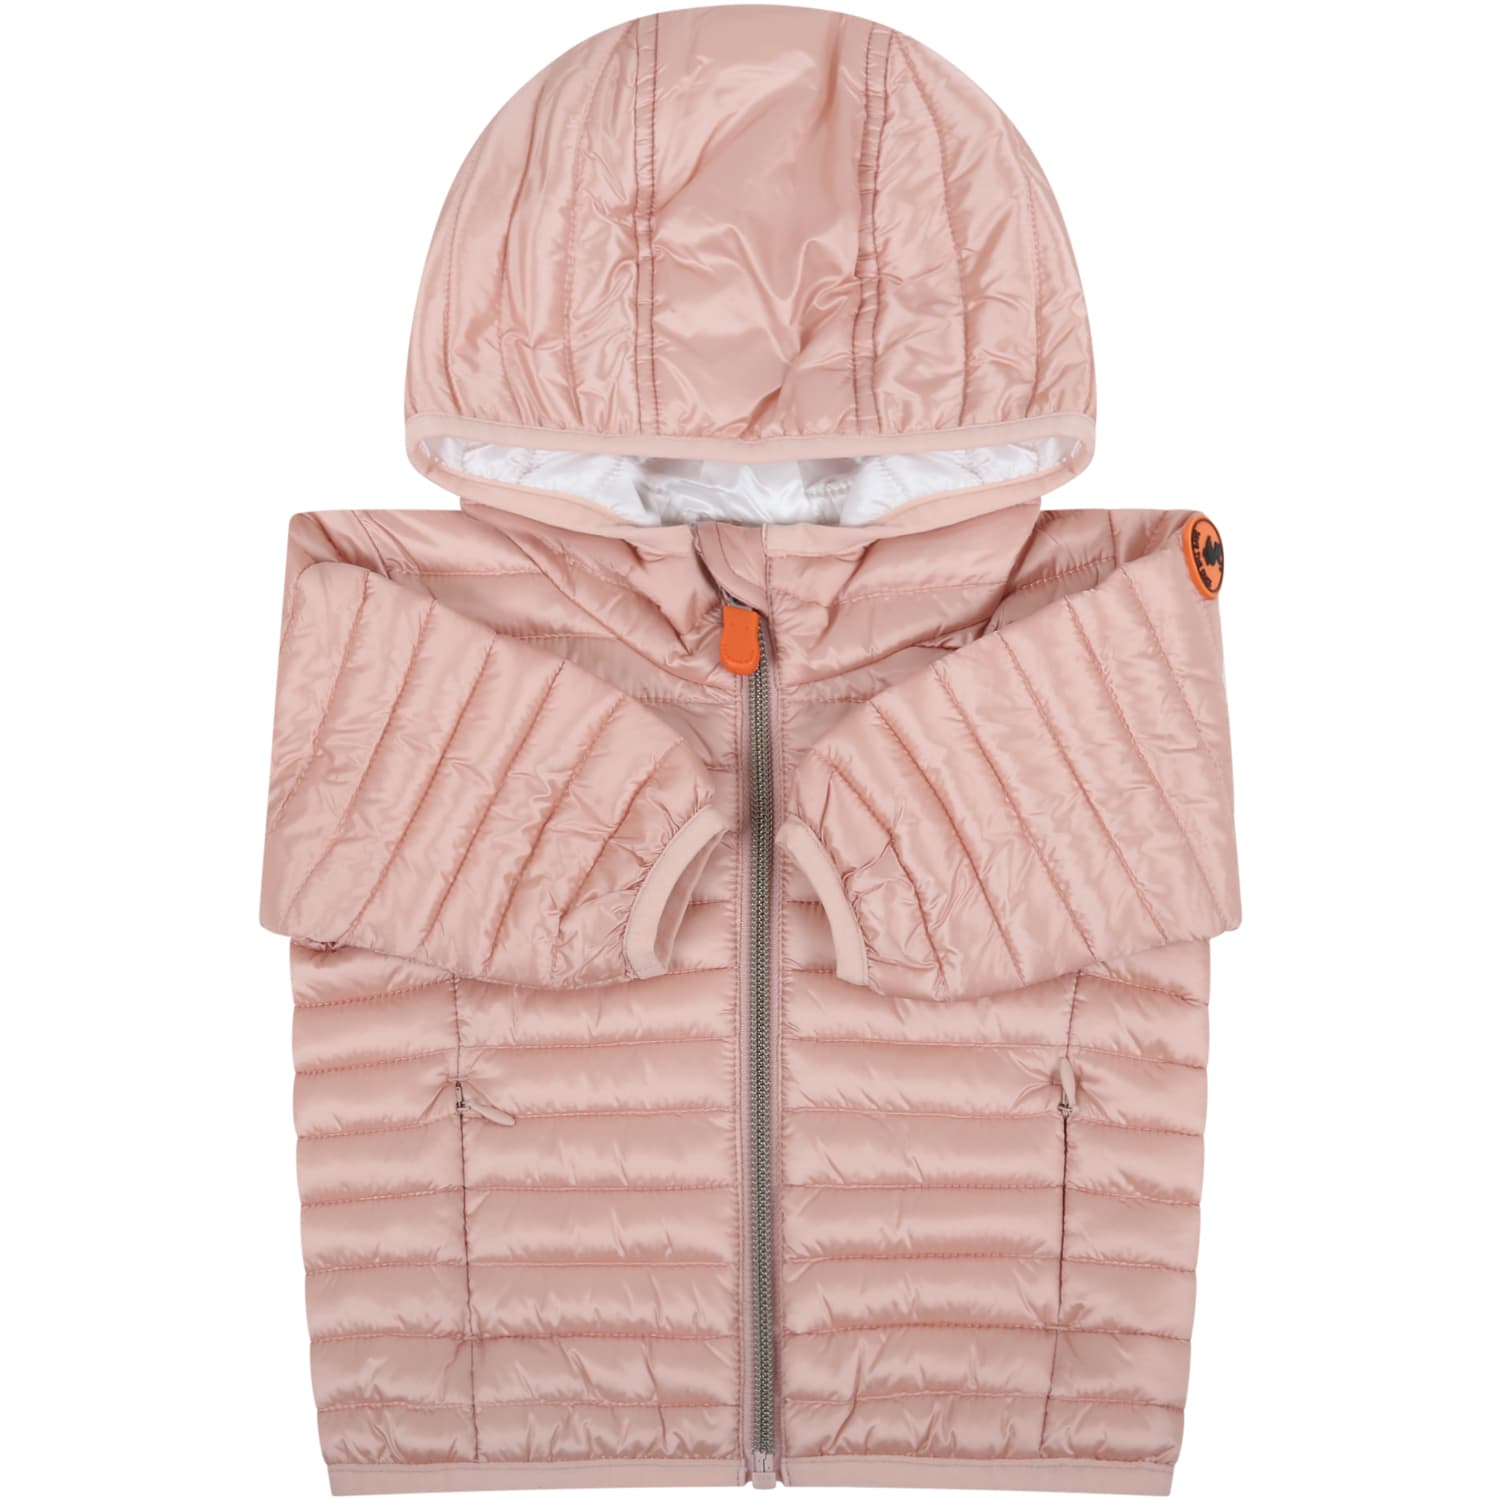 Save the Duck Pink Jacket For Babygirl With Iconic Patch